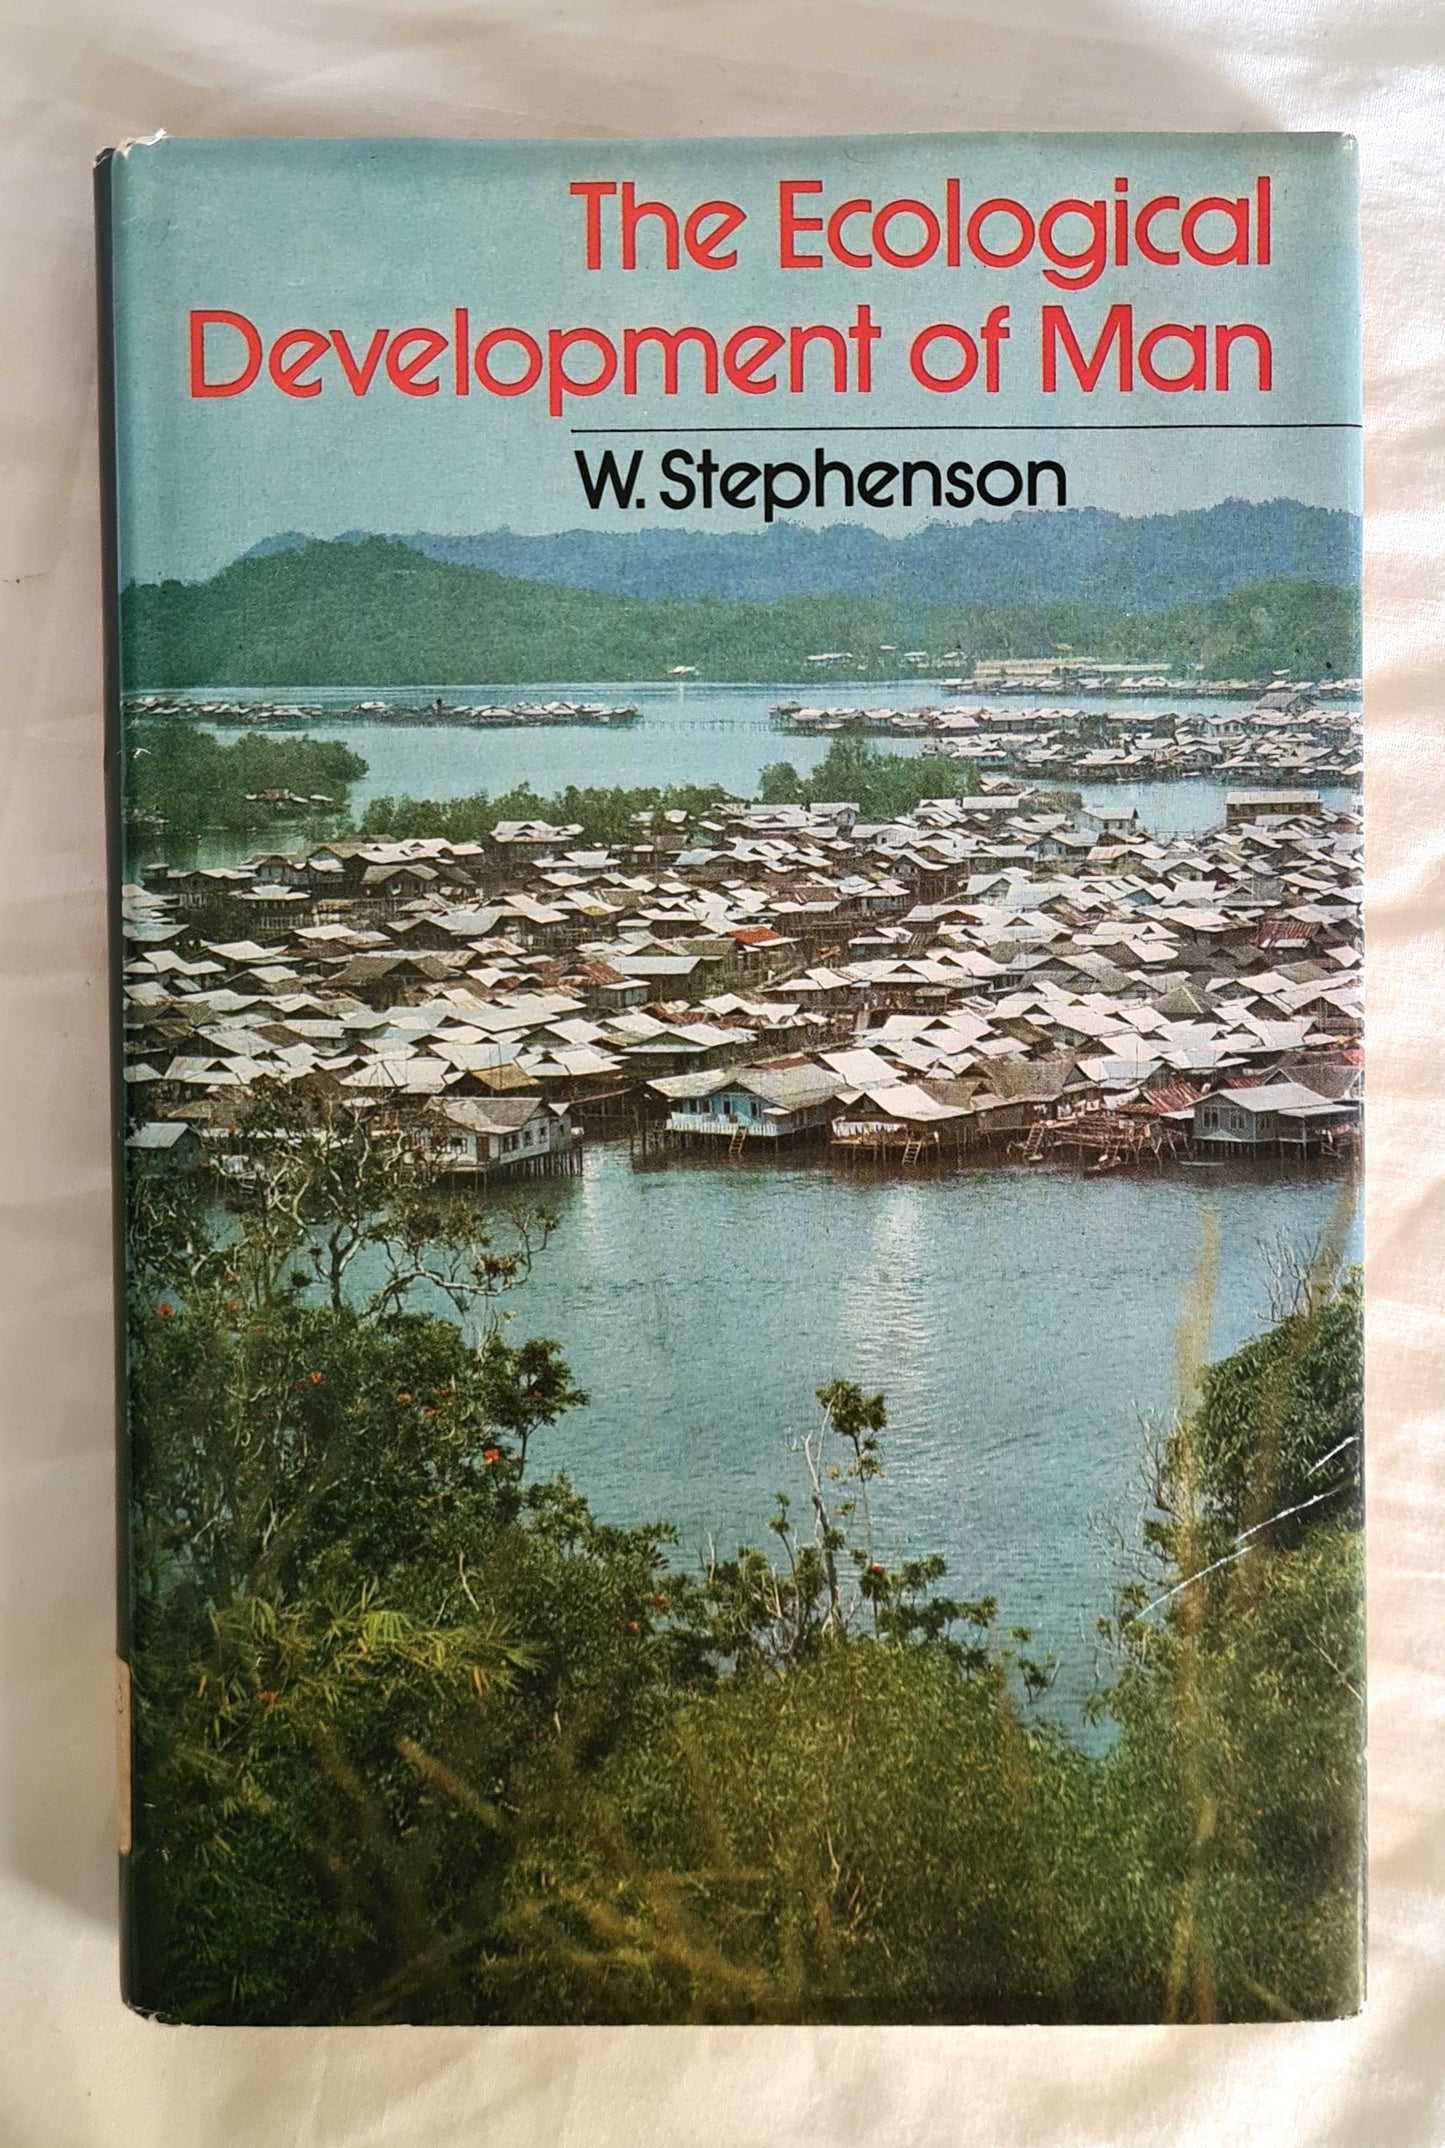 The Ecological Development of Man by W. Stephenson